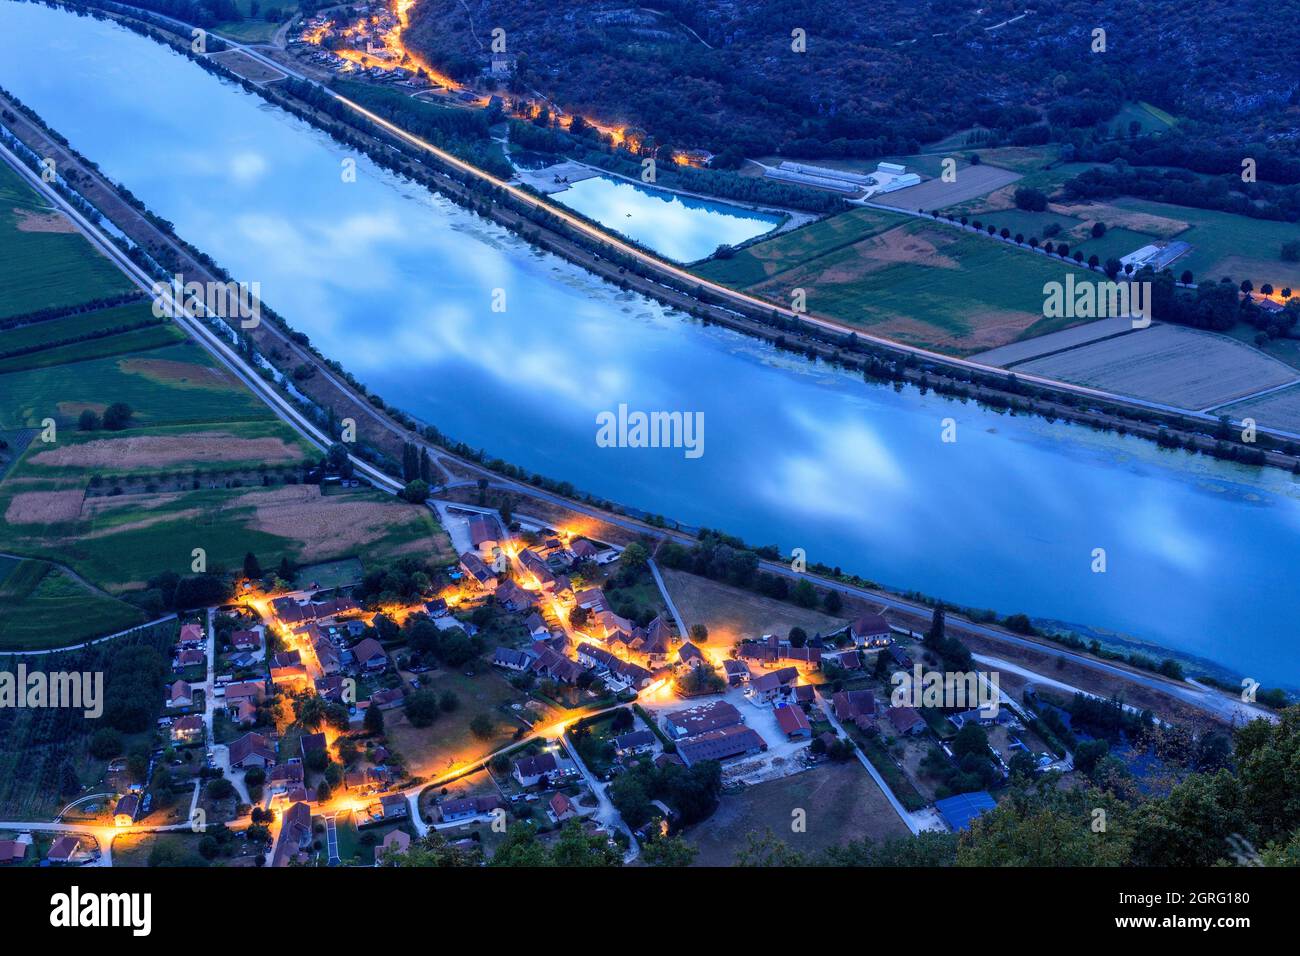 France, Savoie, Champagneux, the Rhone river Stock Photo